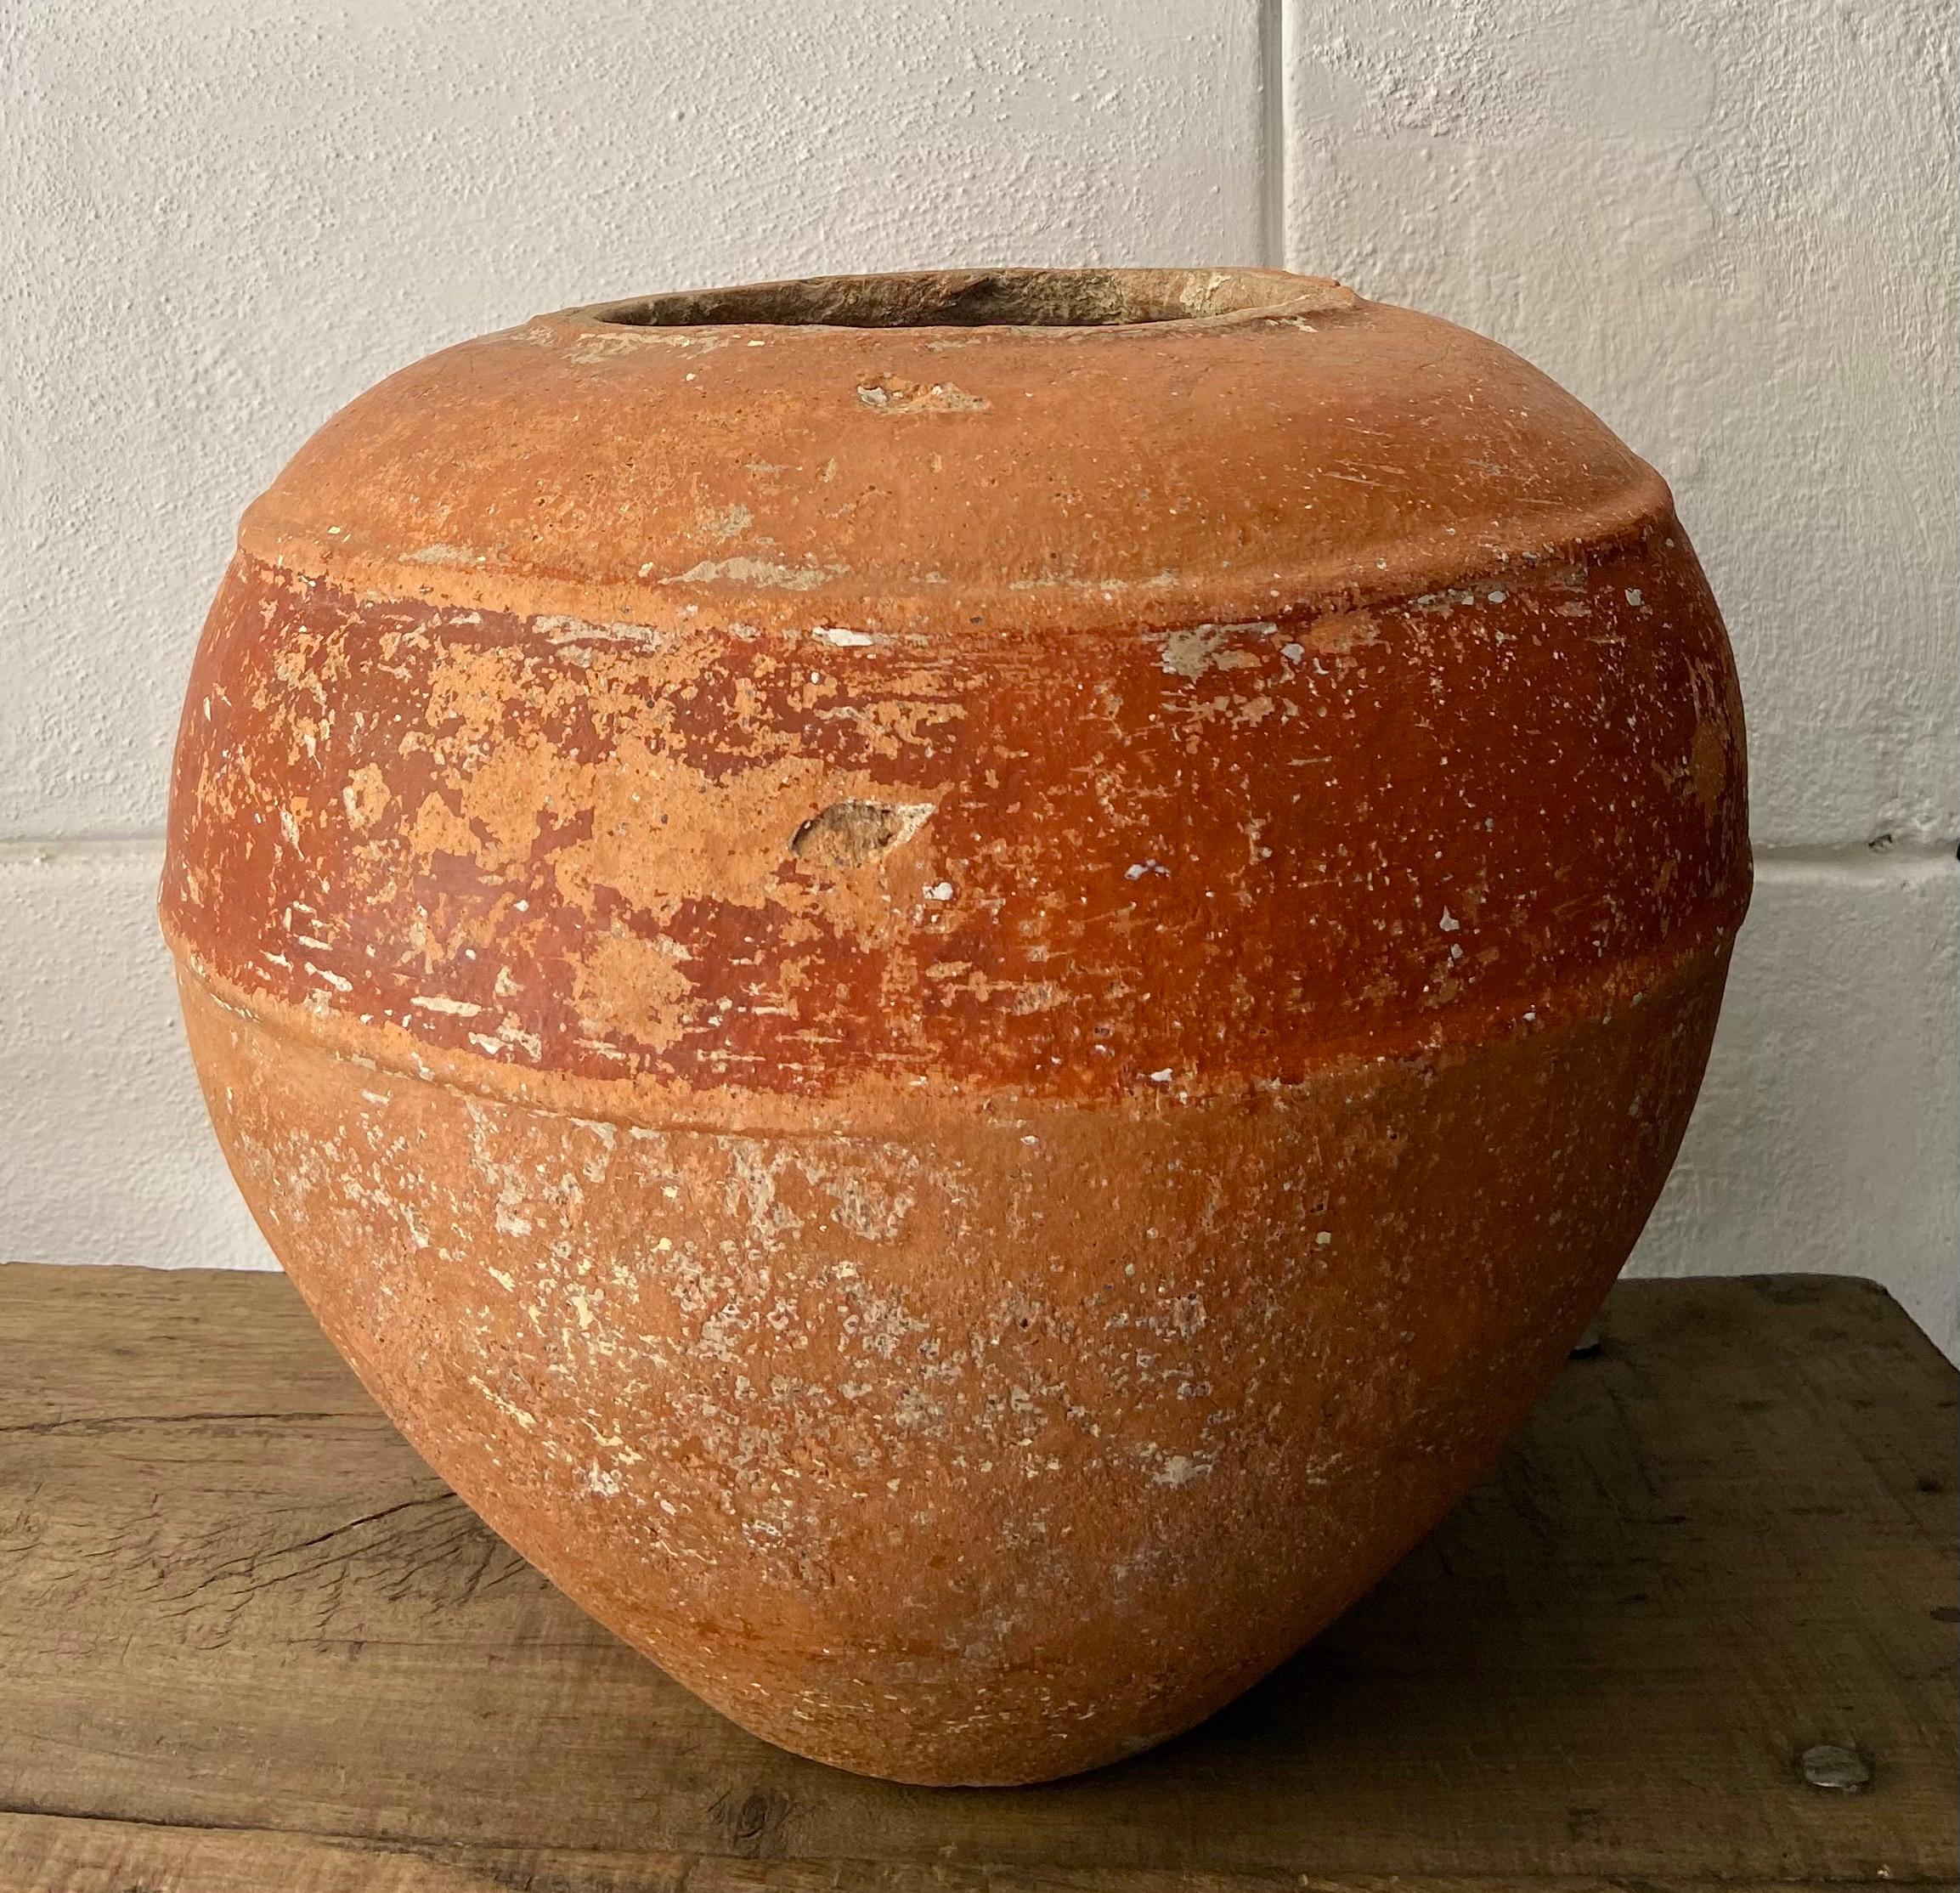 Terracotta water pot from the Yucatan Peninsula, Circa 1930's. Hand crafted by Mayan potters from the central Yucatan area in early to mid 20th century.